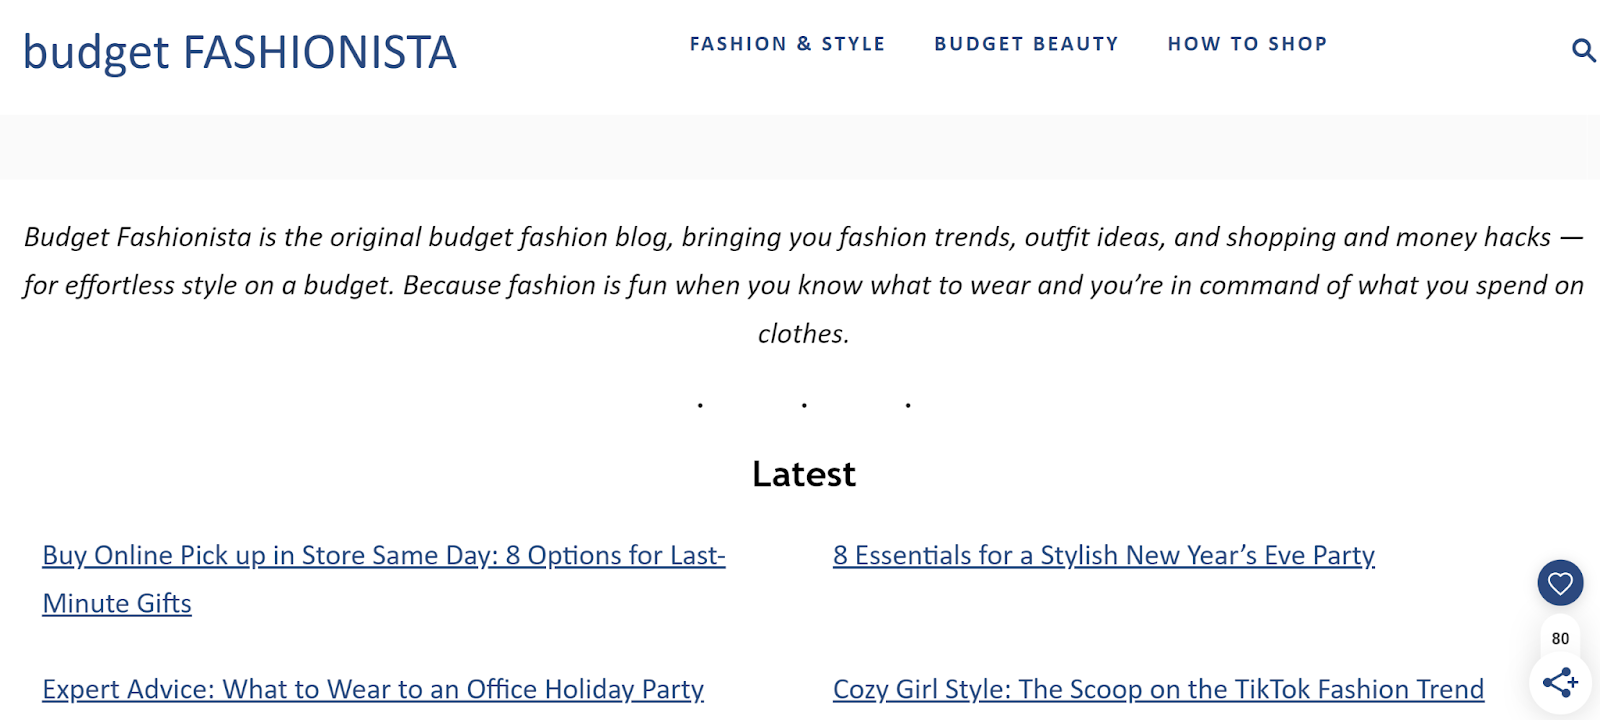 Budget Fashionista is a beauty blog that focuses on making fashion affordable.